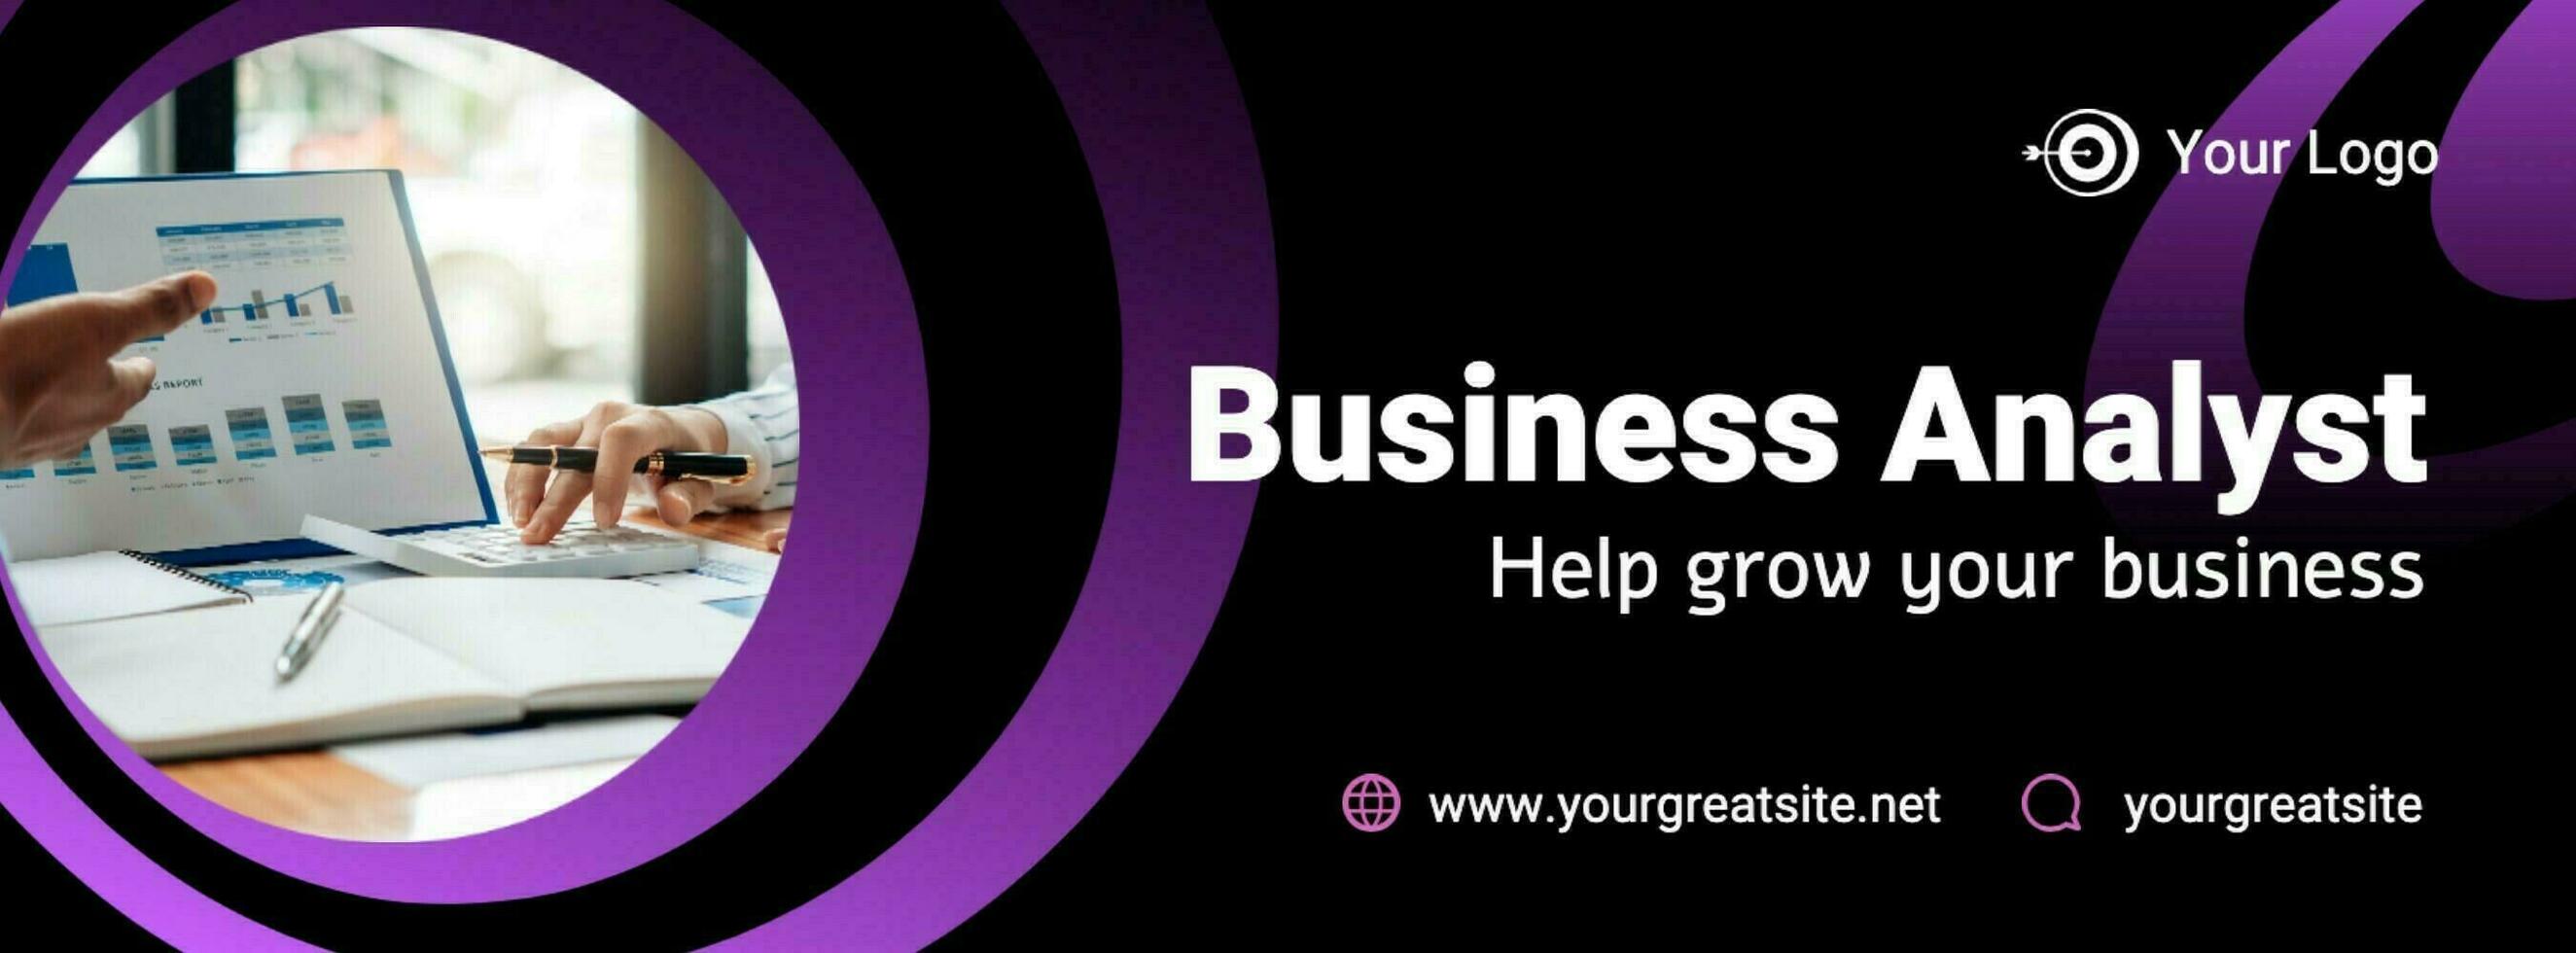 Black Purple Modern Business Analyst Facebook Cover template